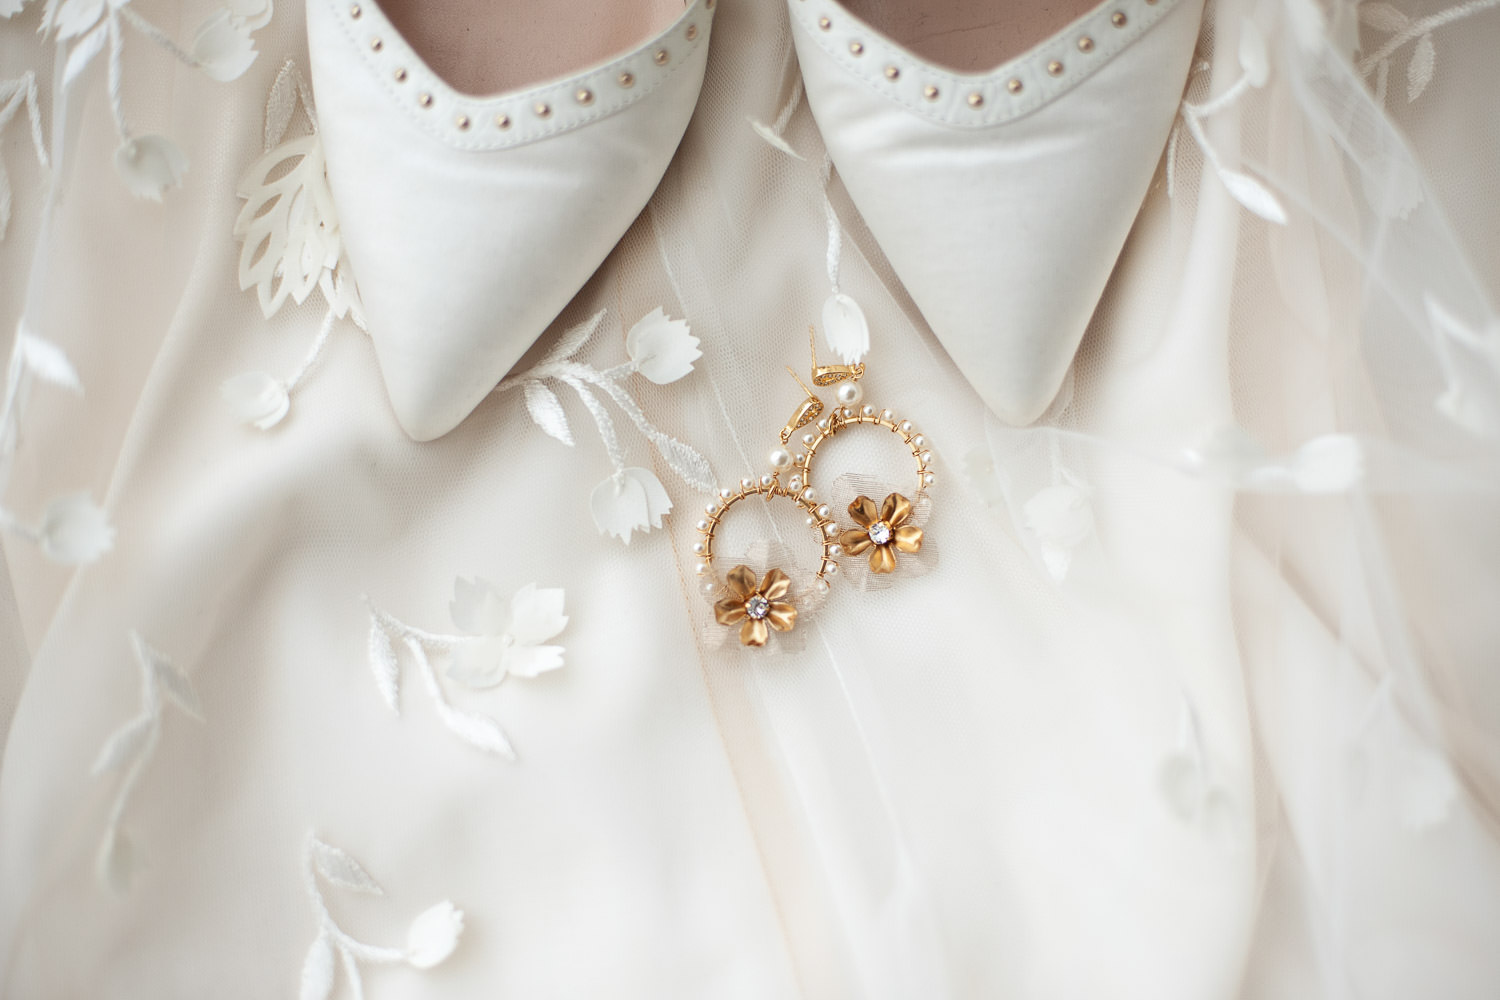 Earrings from Joanna Bisley captured by Tara Whittaker Photography